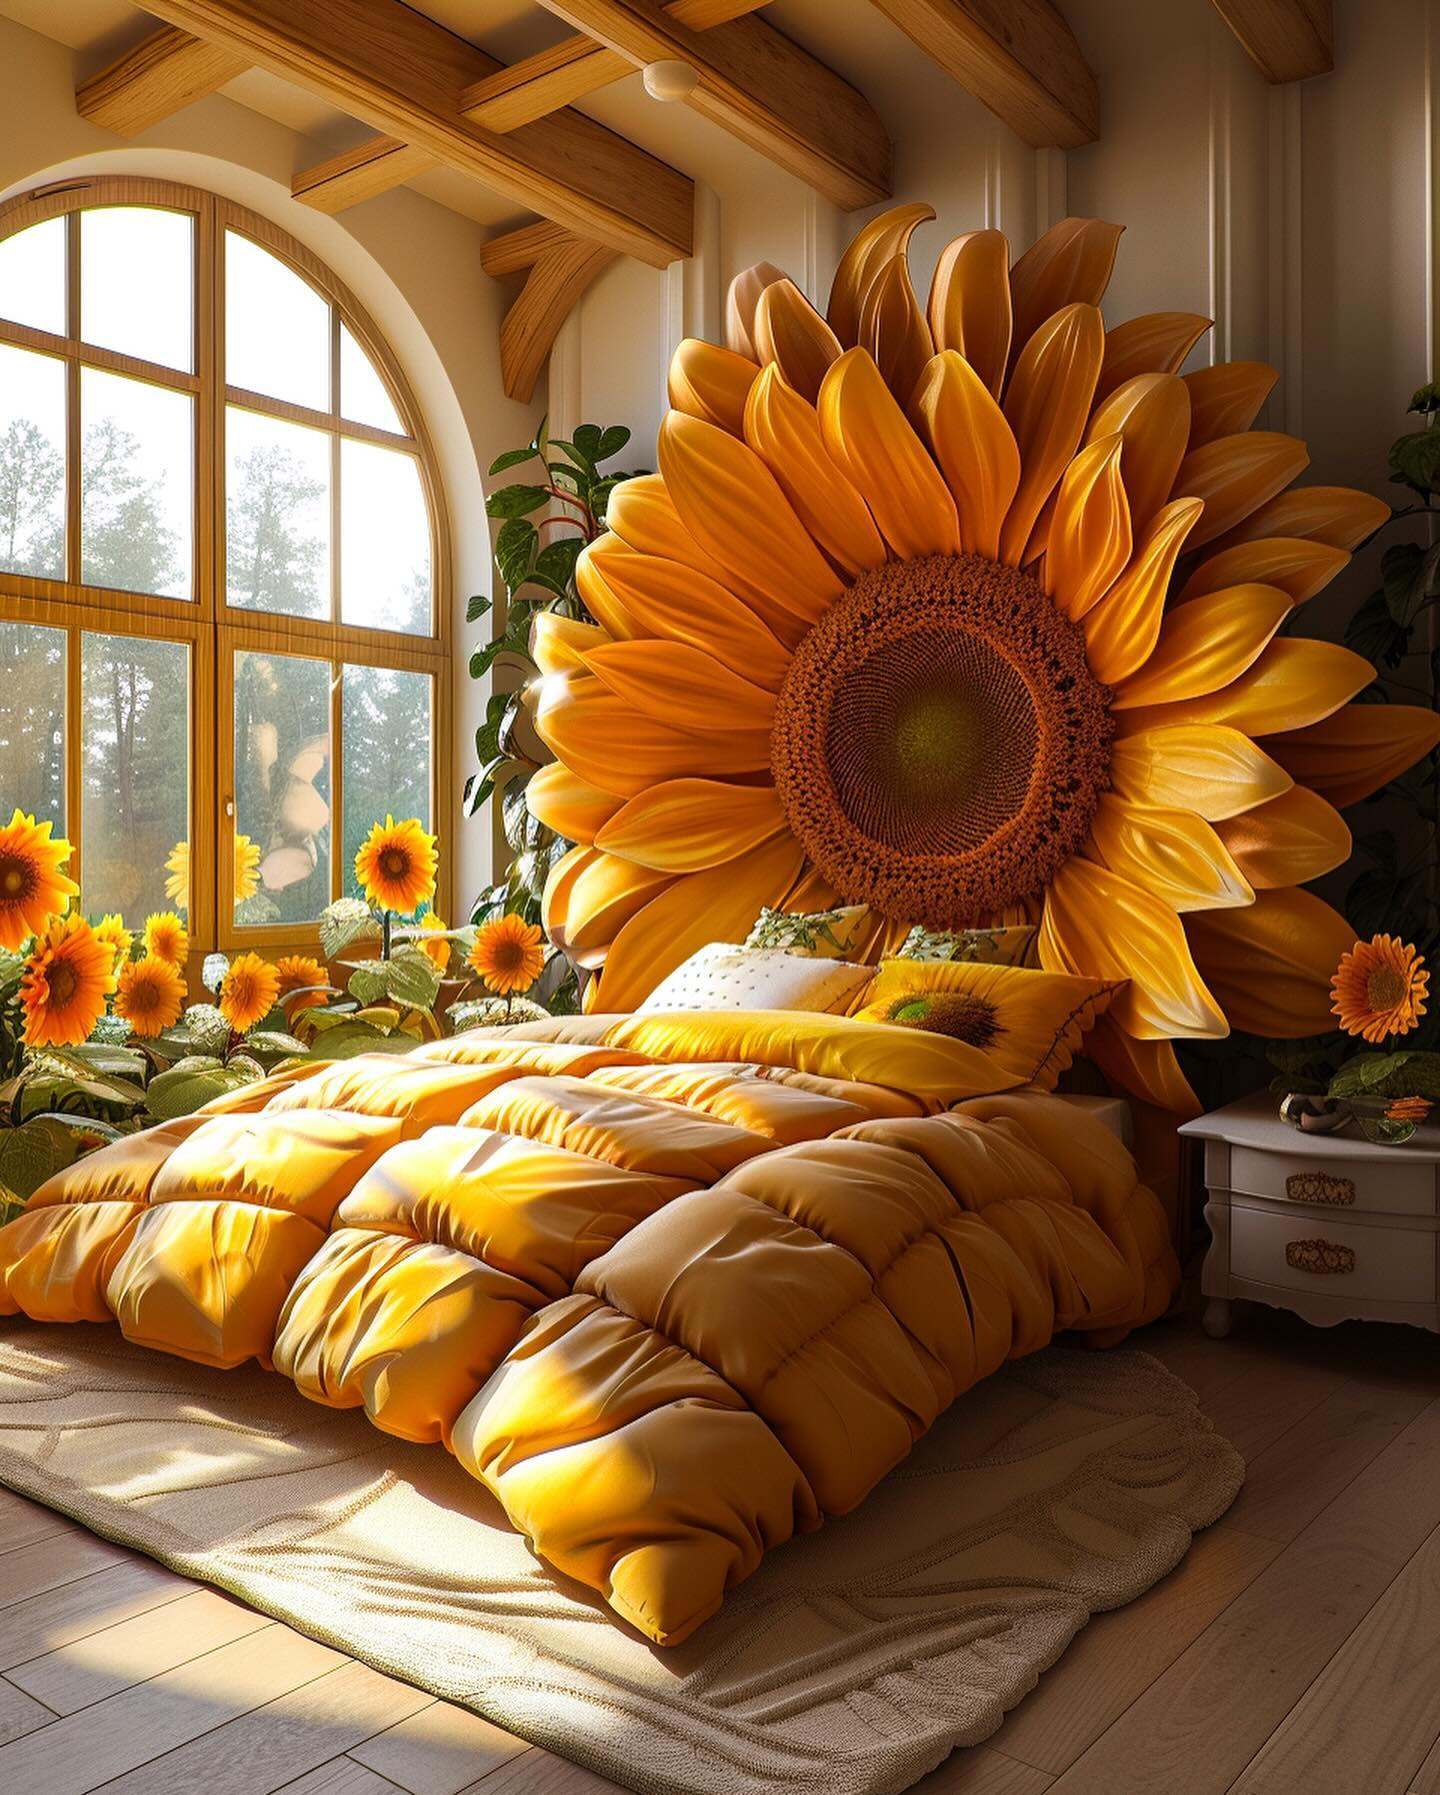 Sunflower Shaped Bed: Infusing Sunshine and Style into Your Sleep Haven